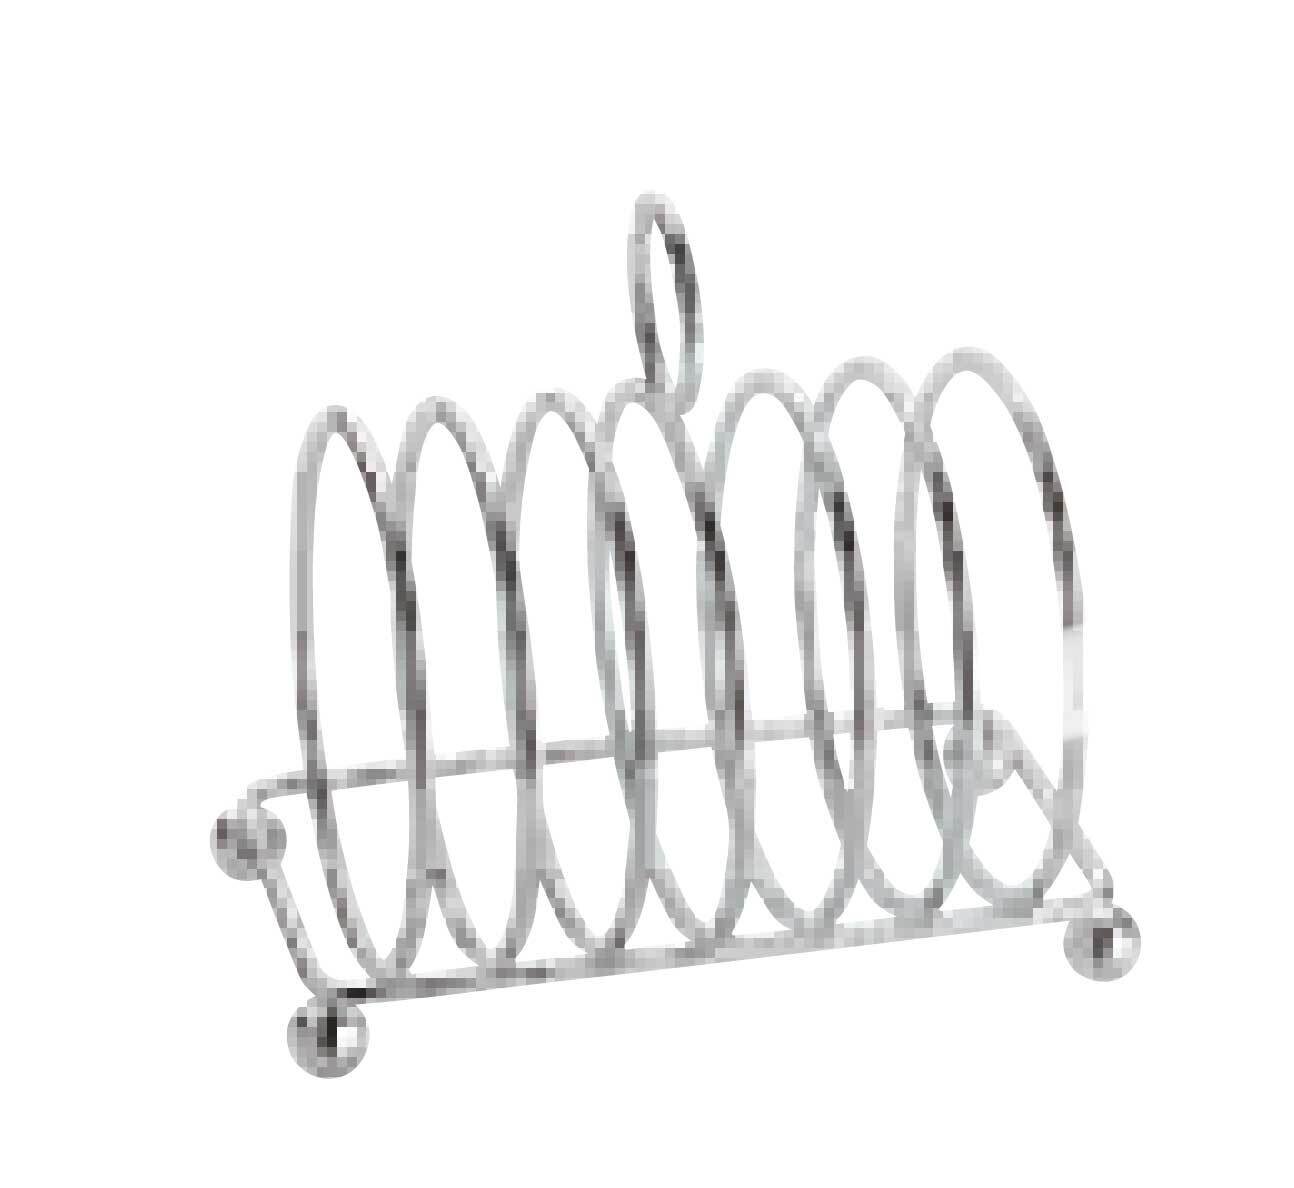 Ercuis Latitude Toast Rack 6 Slices 4.875 Inch Silver Plated F542236-06